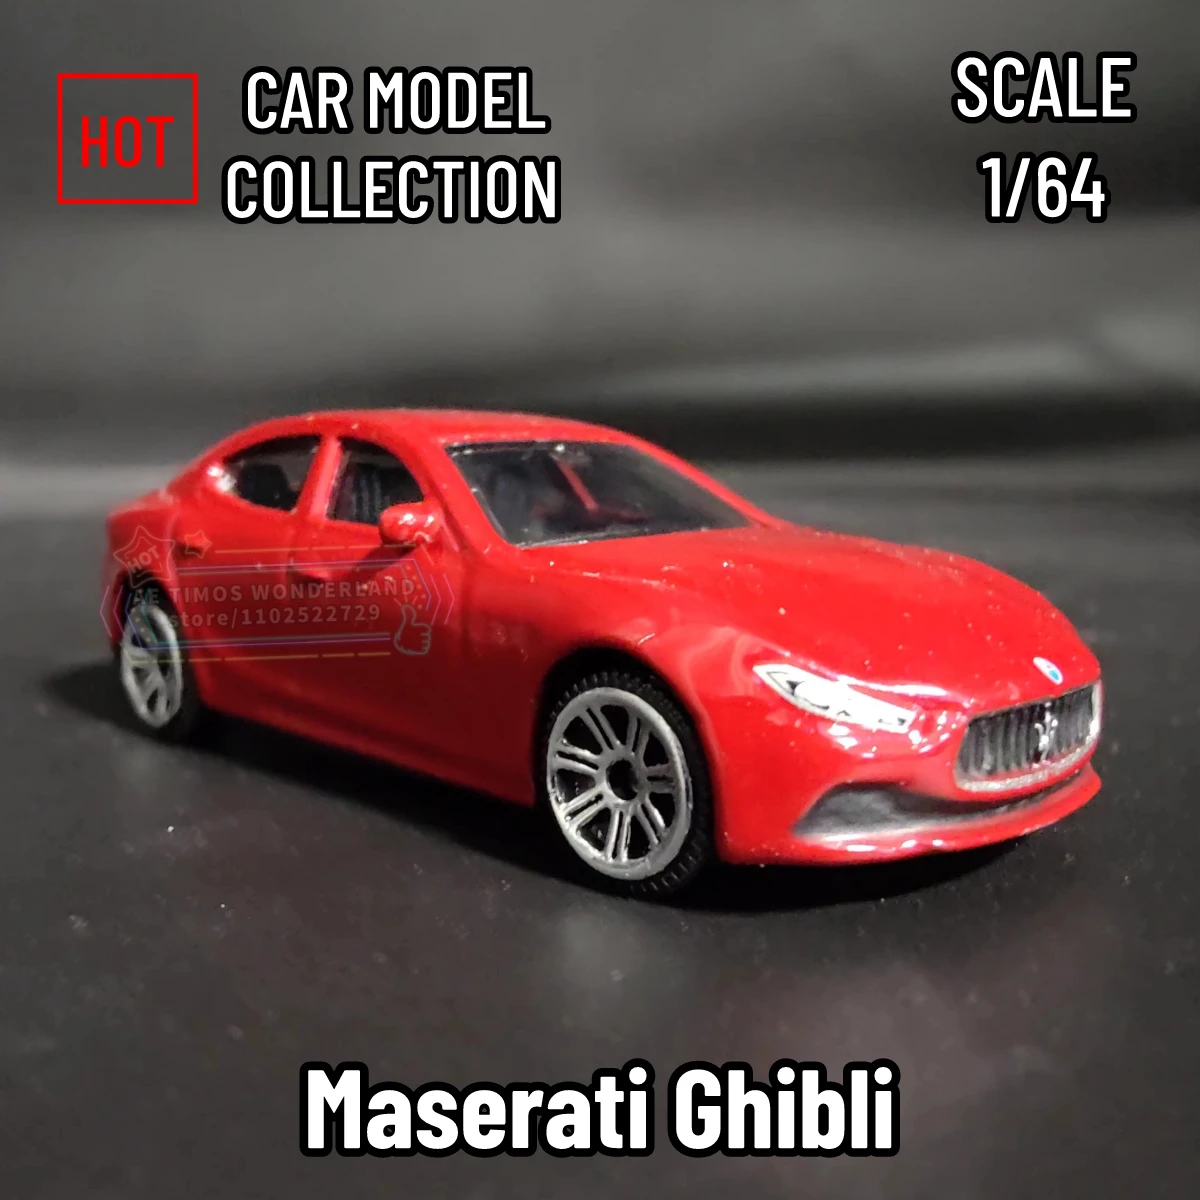 1/64 Maserati Ghibli Toy Car 1:64 3'' Vehicle Miniature Model Free Wheels  Diecast Alloy Metal Collection Gift For Kids Boy Child - AliExpress